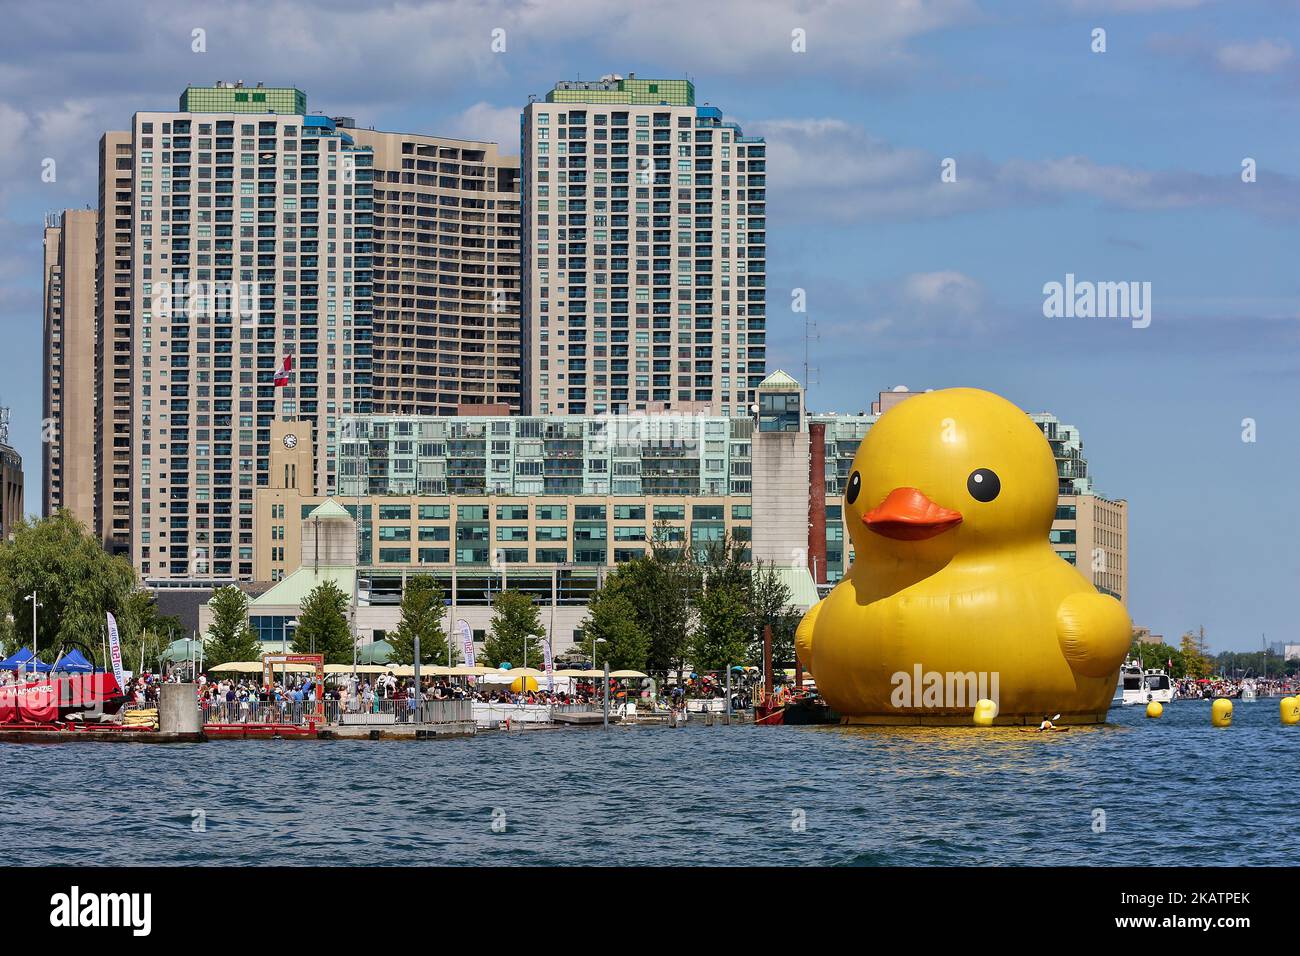 The world’s largest rubber duck arrived in Toronto, Ontario, Canada, on July 03, 2017. The giant rubber duck visited the city of Toronto as part of the Redpath Waterfront Festival. The 13,600-kg inflatable duck was created by Dutch artist Florentijn Hofman and is more than 27 meters in length and nearly six storeys tall. (Photo by Creative Touch Imaging Ltd./NurPhoto) Stock Photo